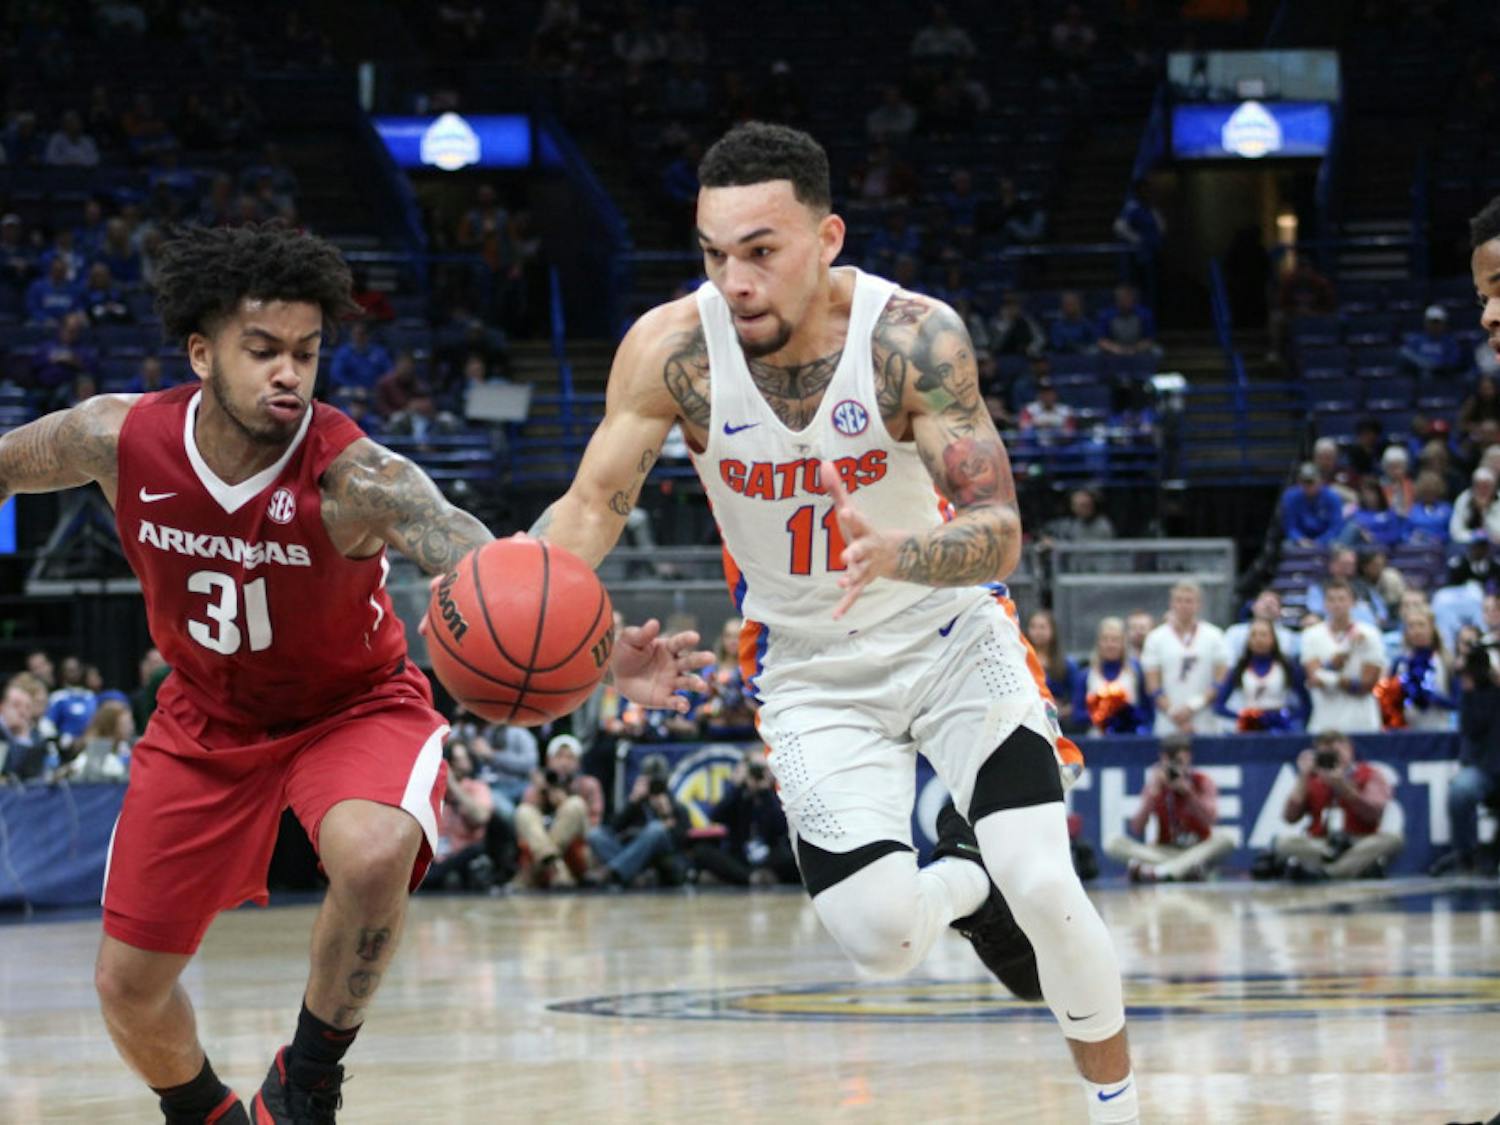 The Florida men's basketball team will attempt to use last season's 77-70 loss to South Carolina in the Elite Eight to propel it on another impressive showing at the NCAA Tournament.&nbsp;“We have pieces that have been here,” UF guard Chris Chiozza said.